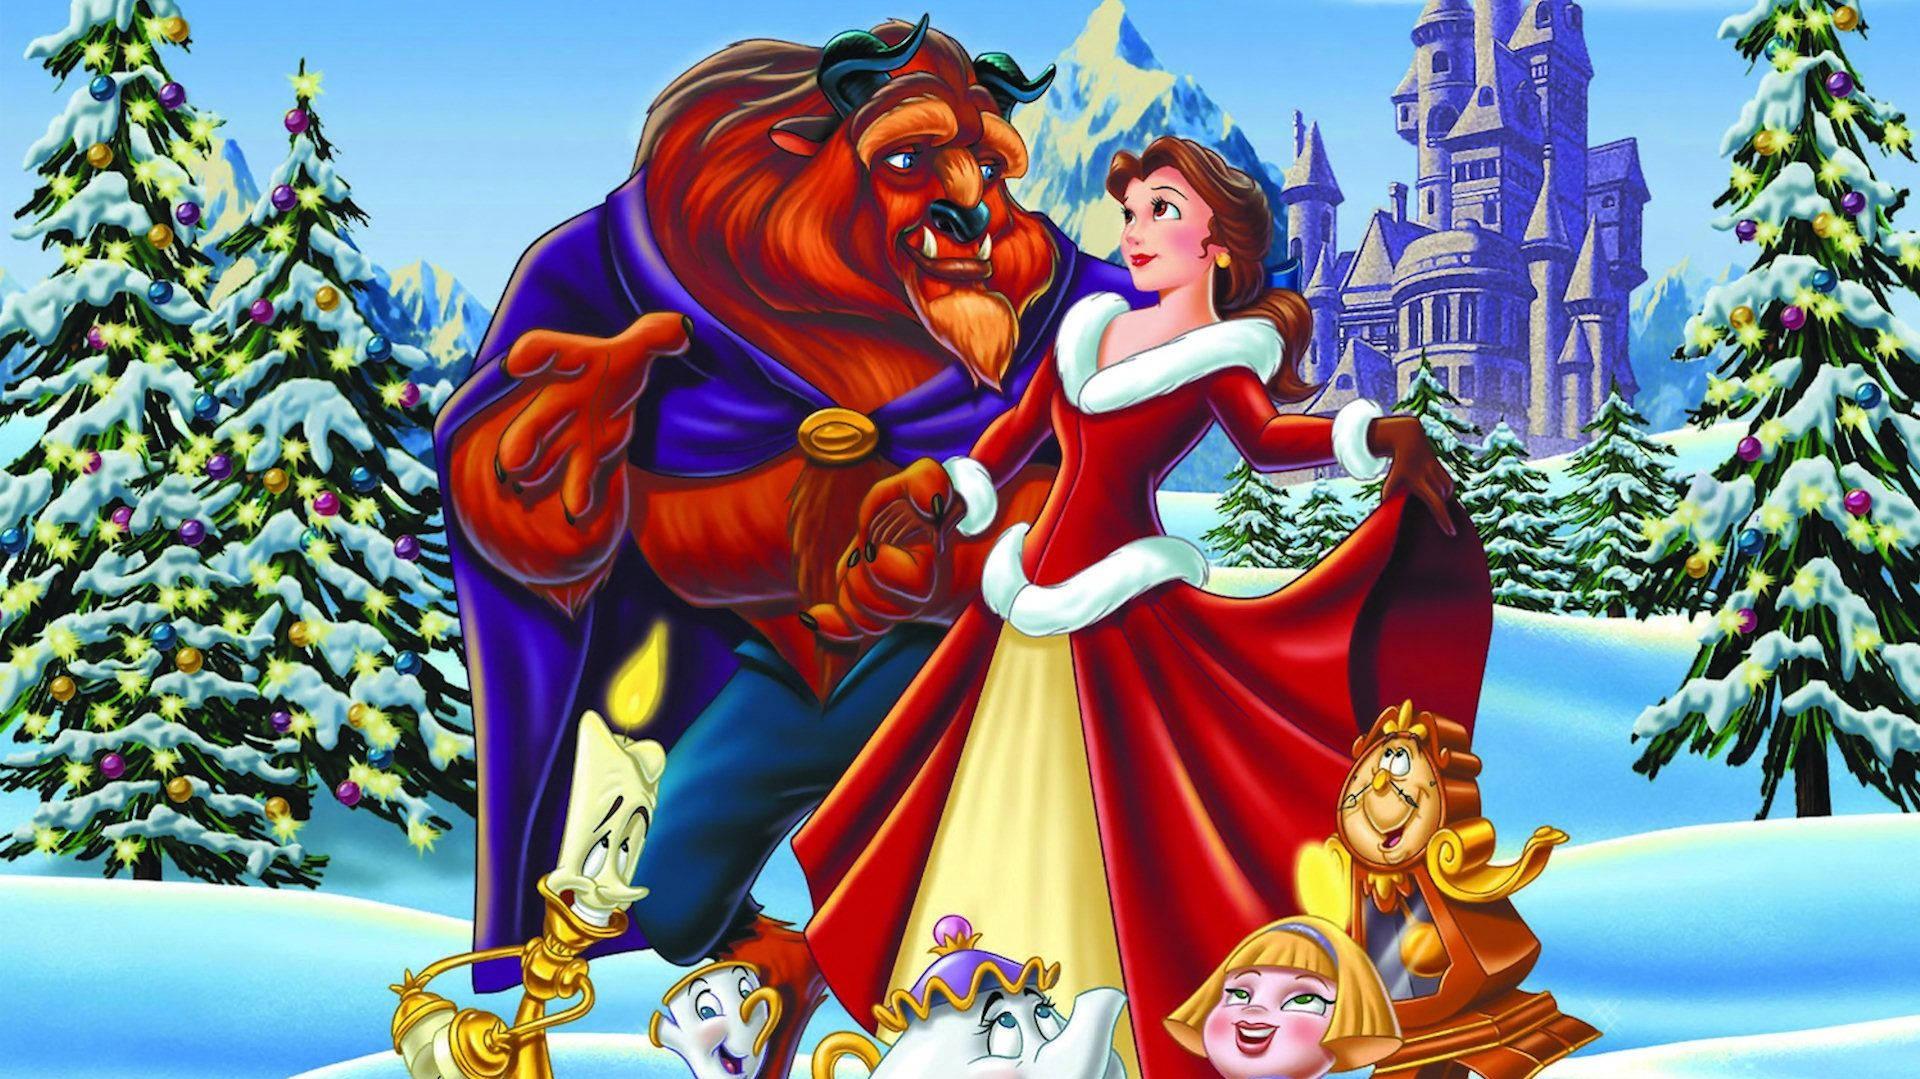 Download Merry Christmas with Disneys Beauty and the Beast